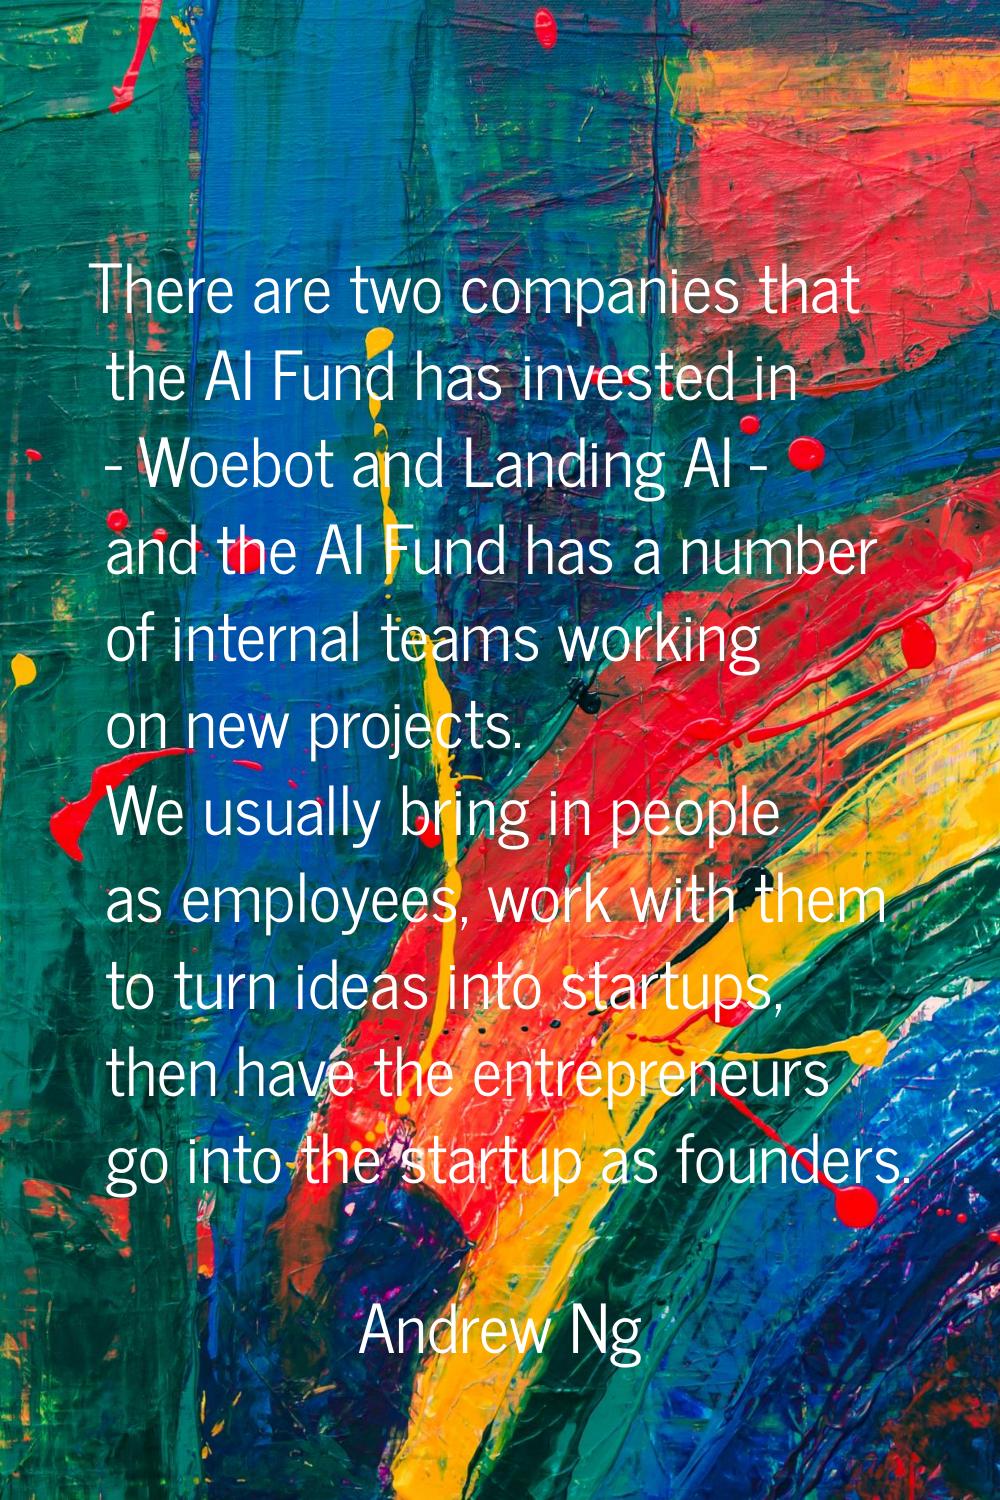 There are two companies that the AI Fund has invested in - Woebot and Landing AI - and the AI Fund 